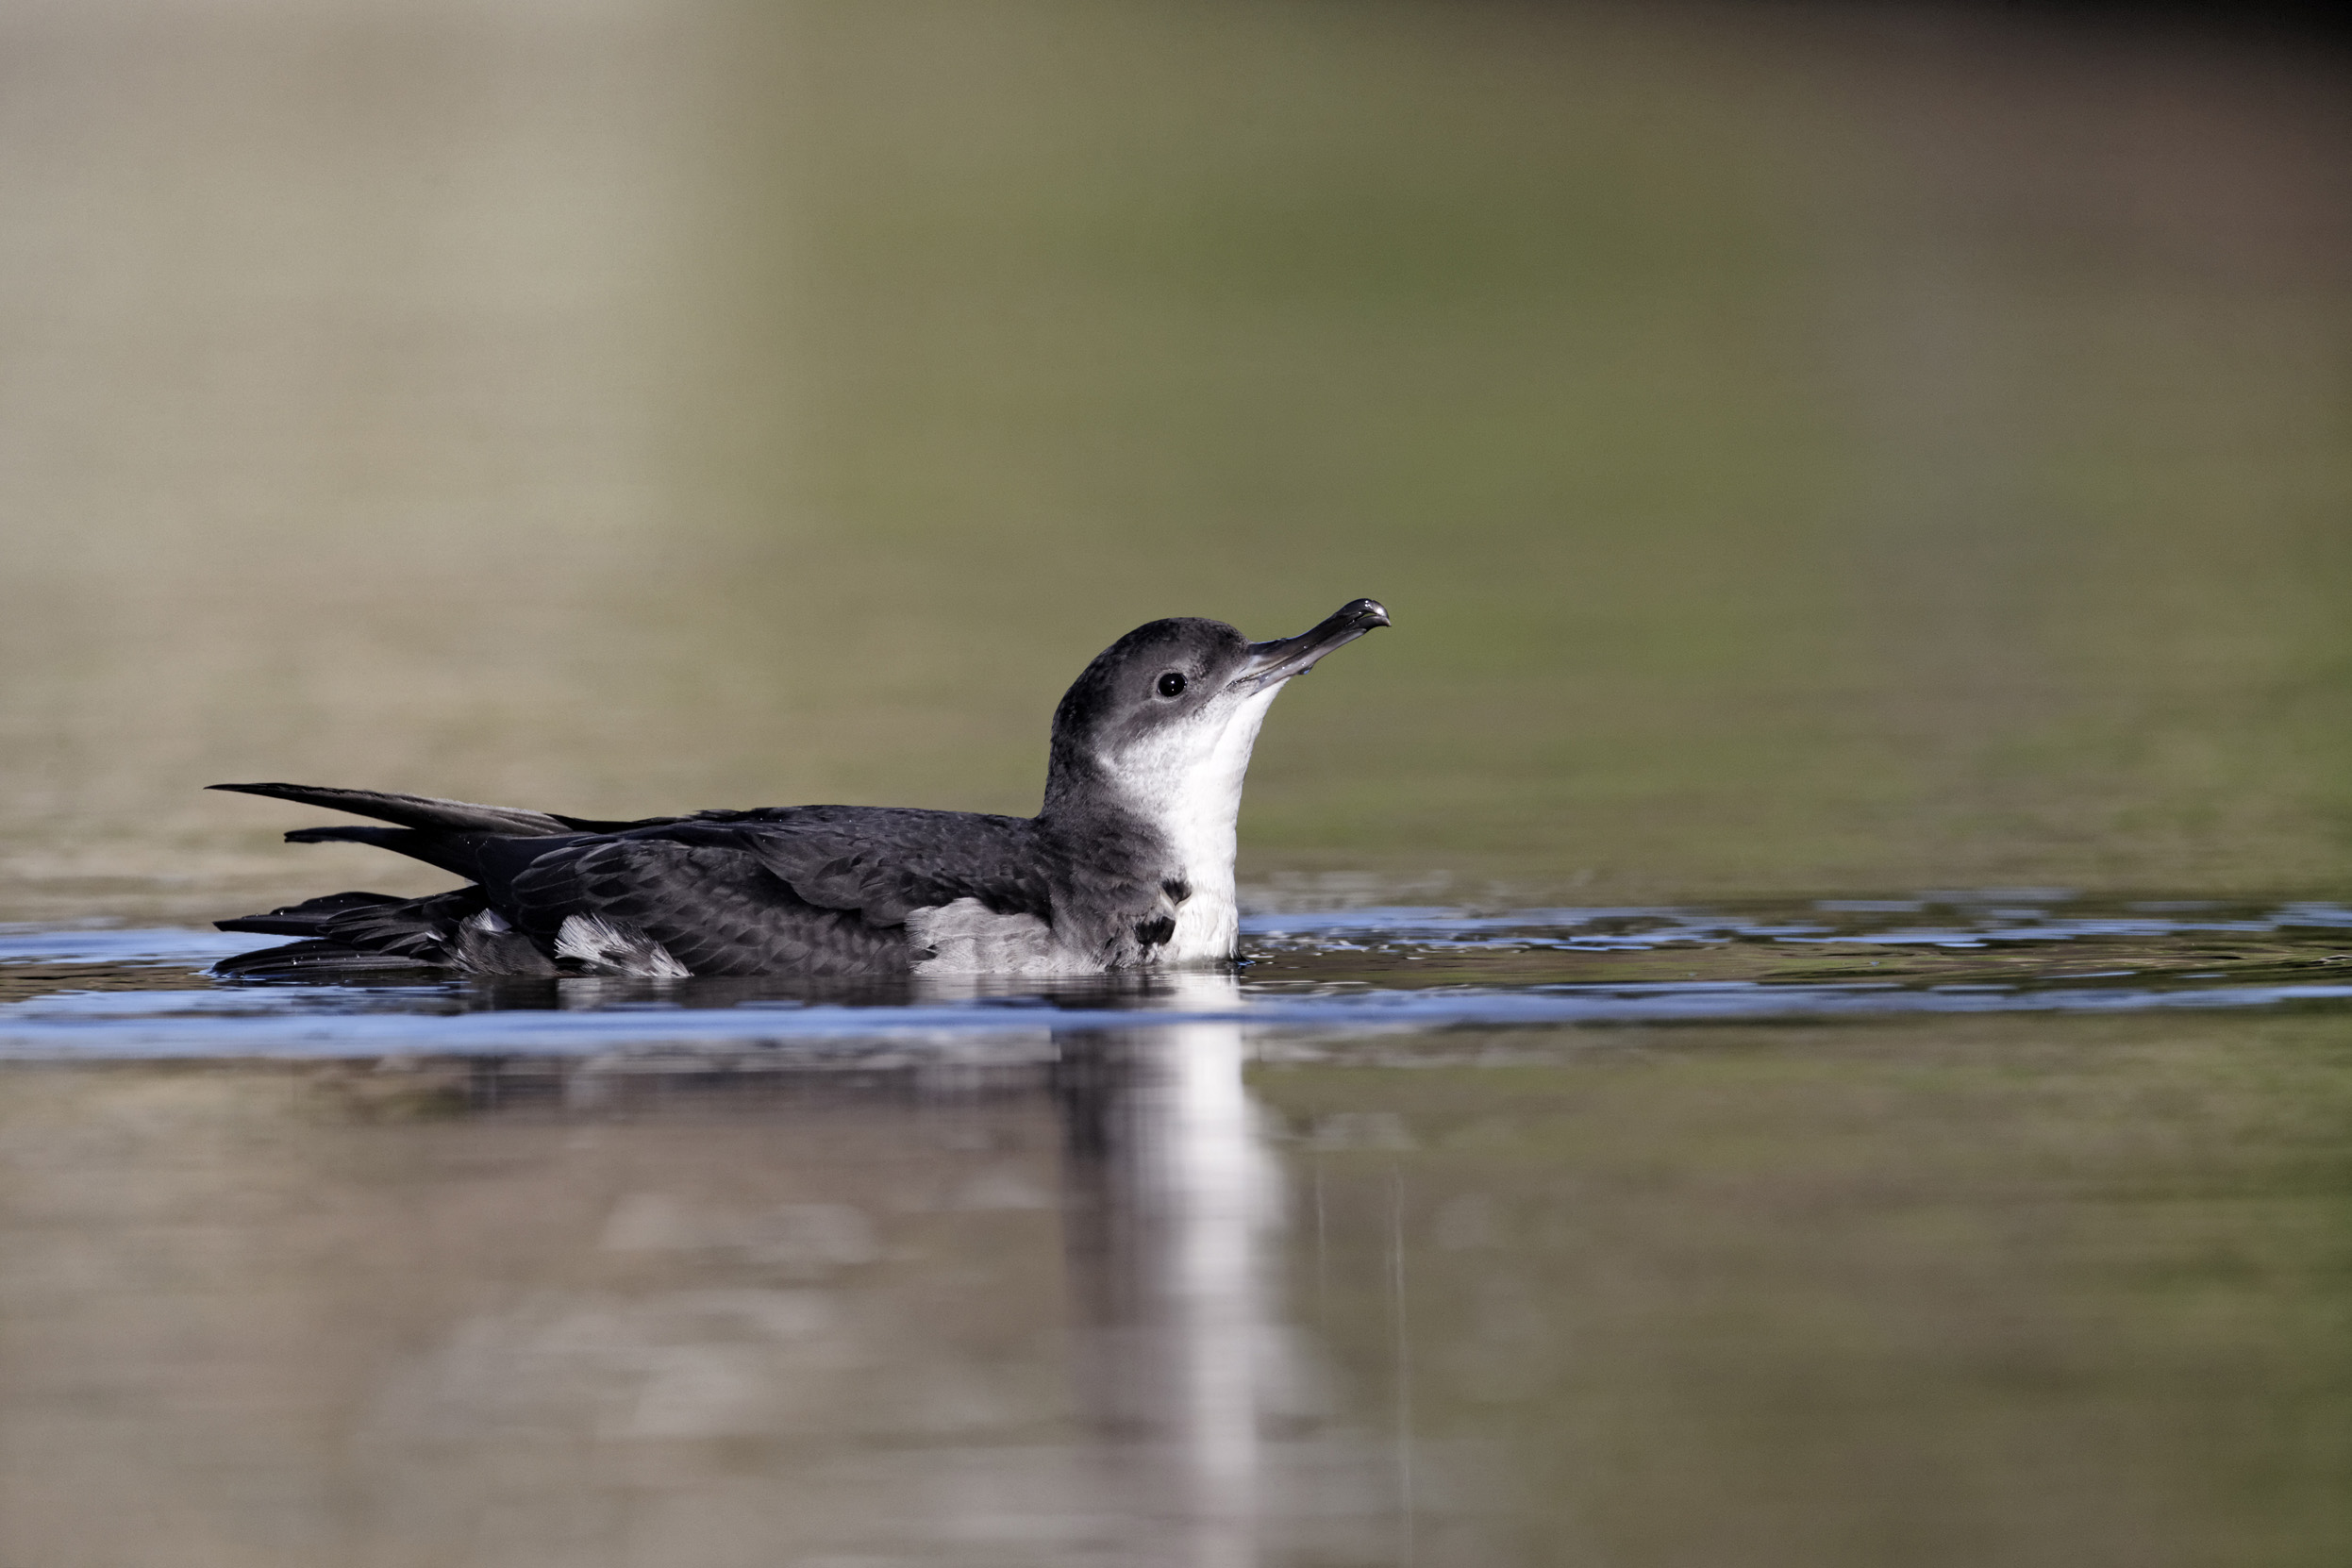 Manx Shearwater swimming on a body of water.